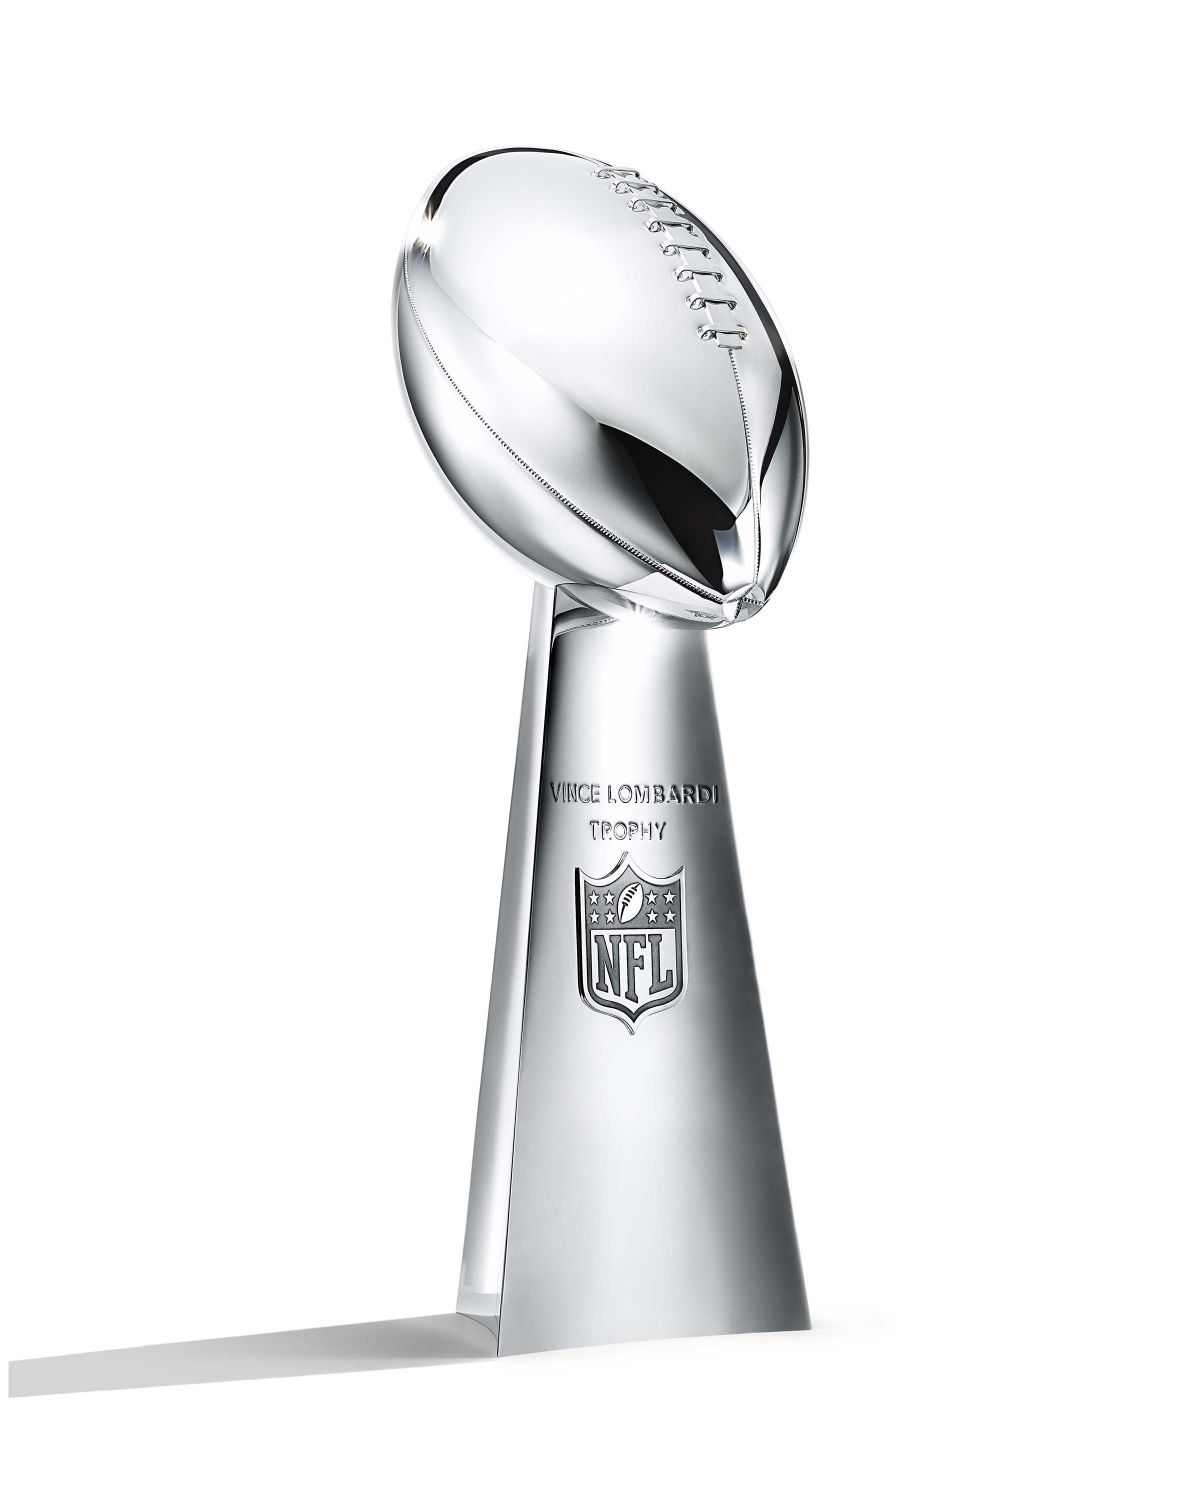 Take A Look At The Amazing Vince Lombardi Trophy